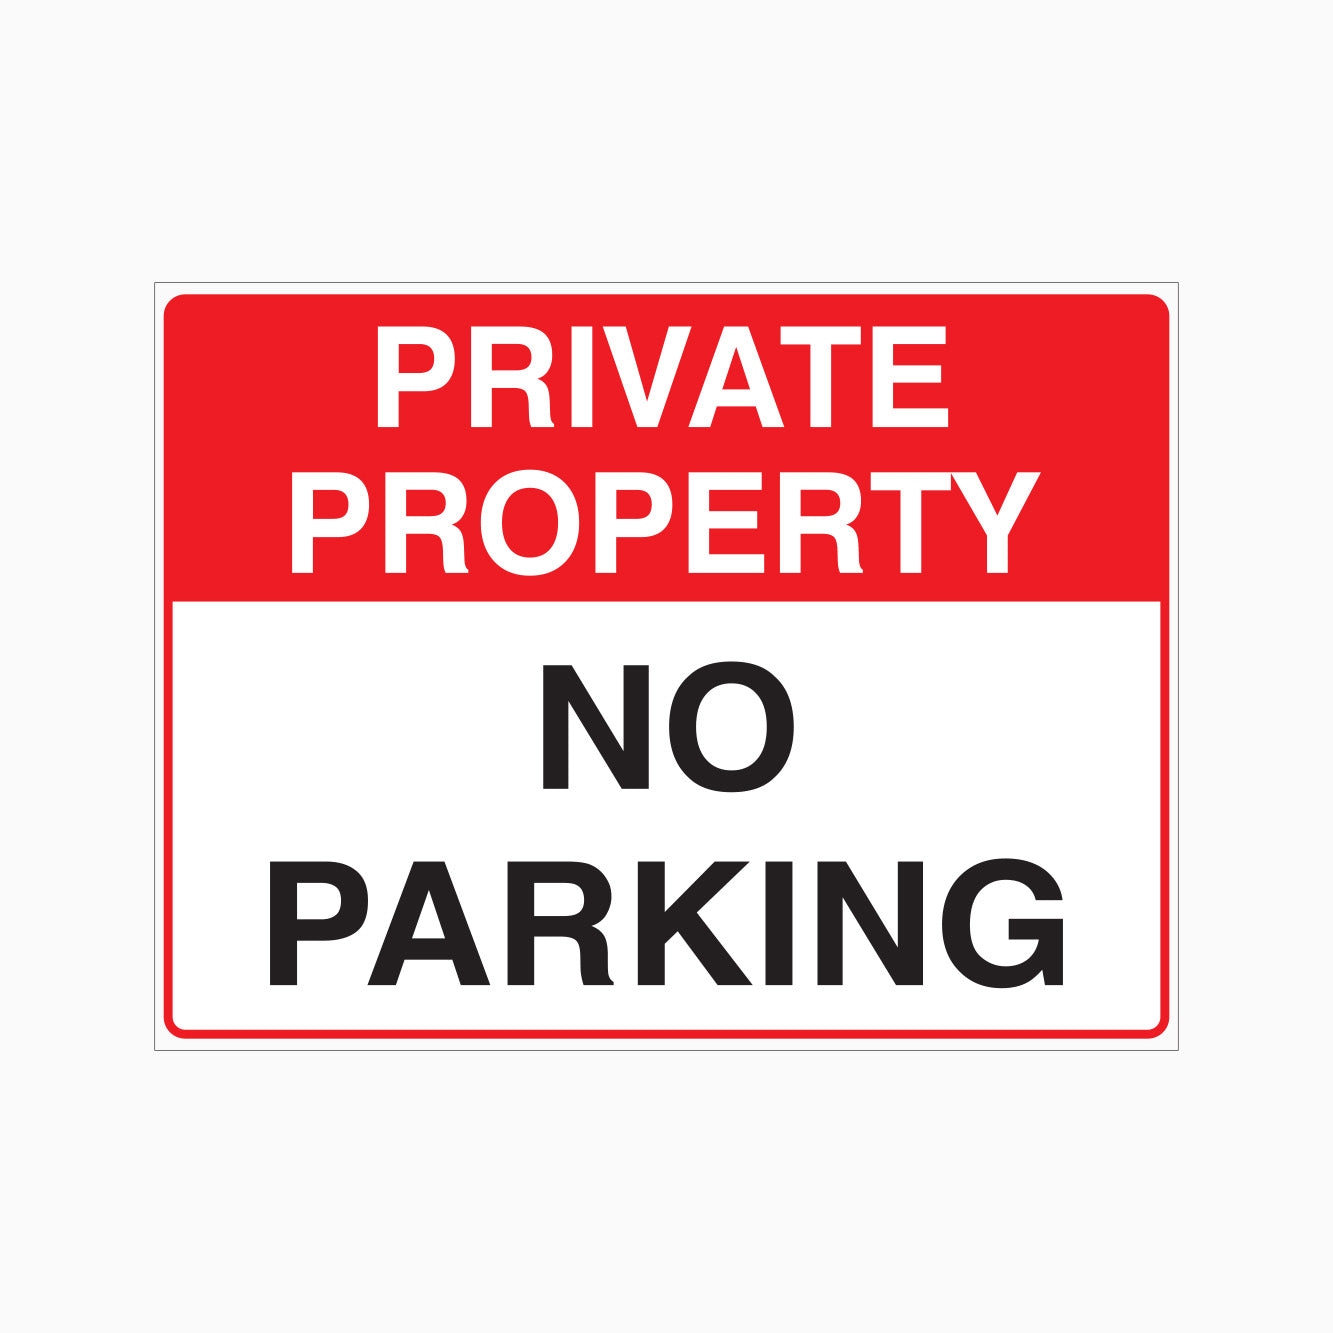 PRIVATE PROPERTY - NO PARKING SIGN